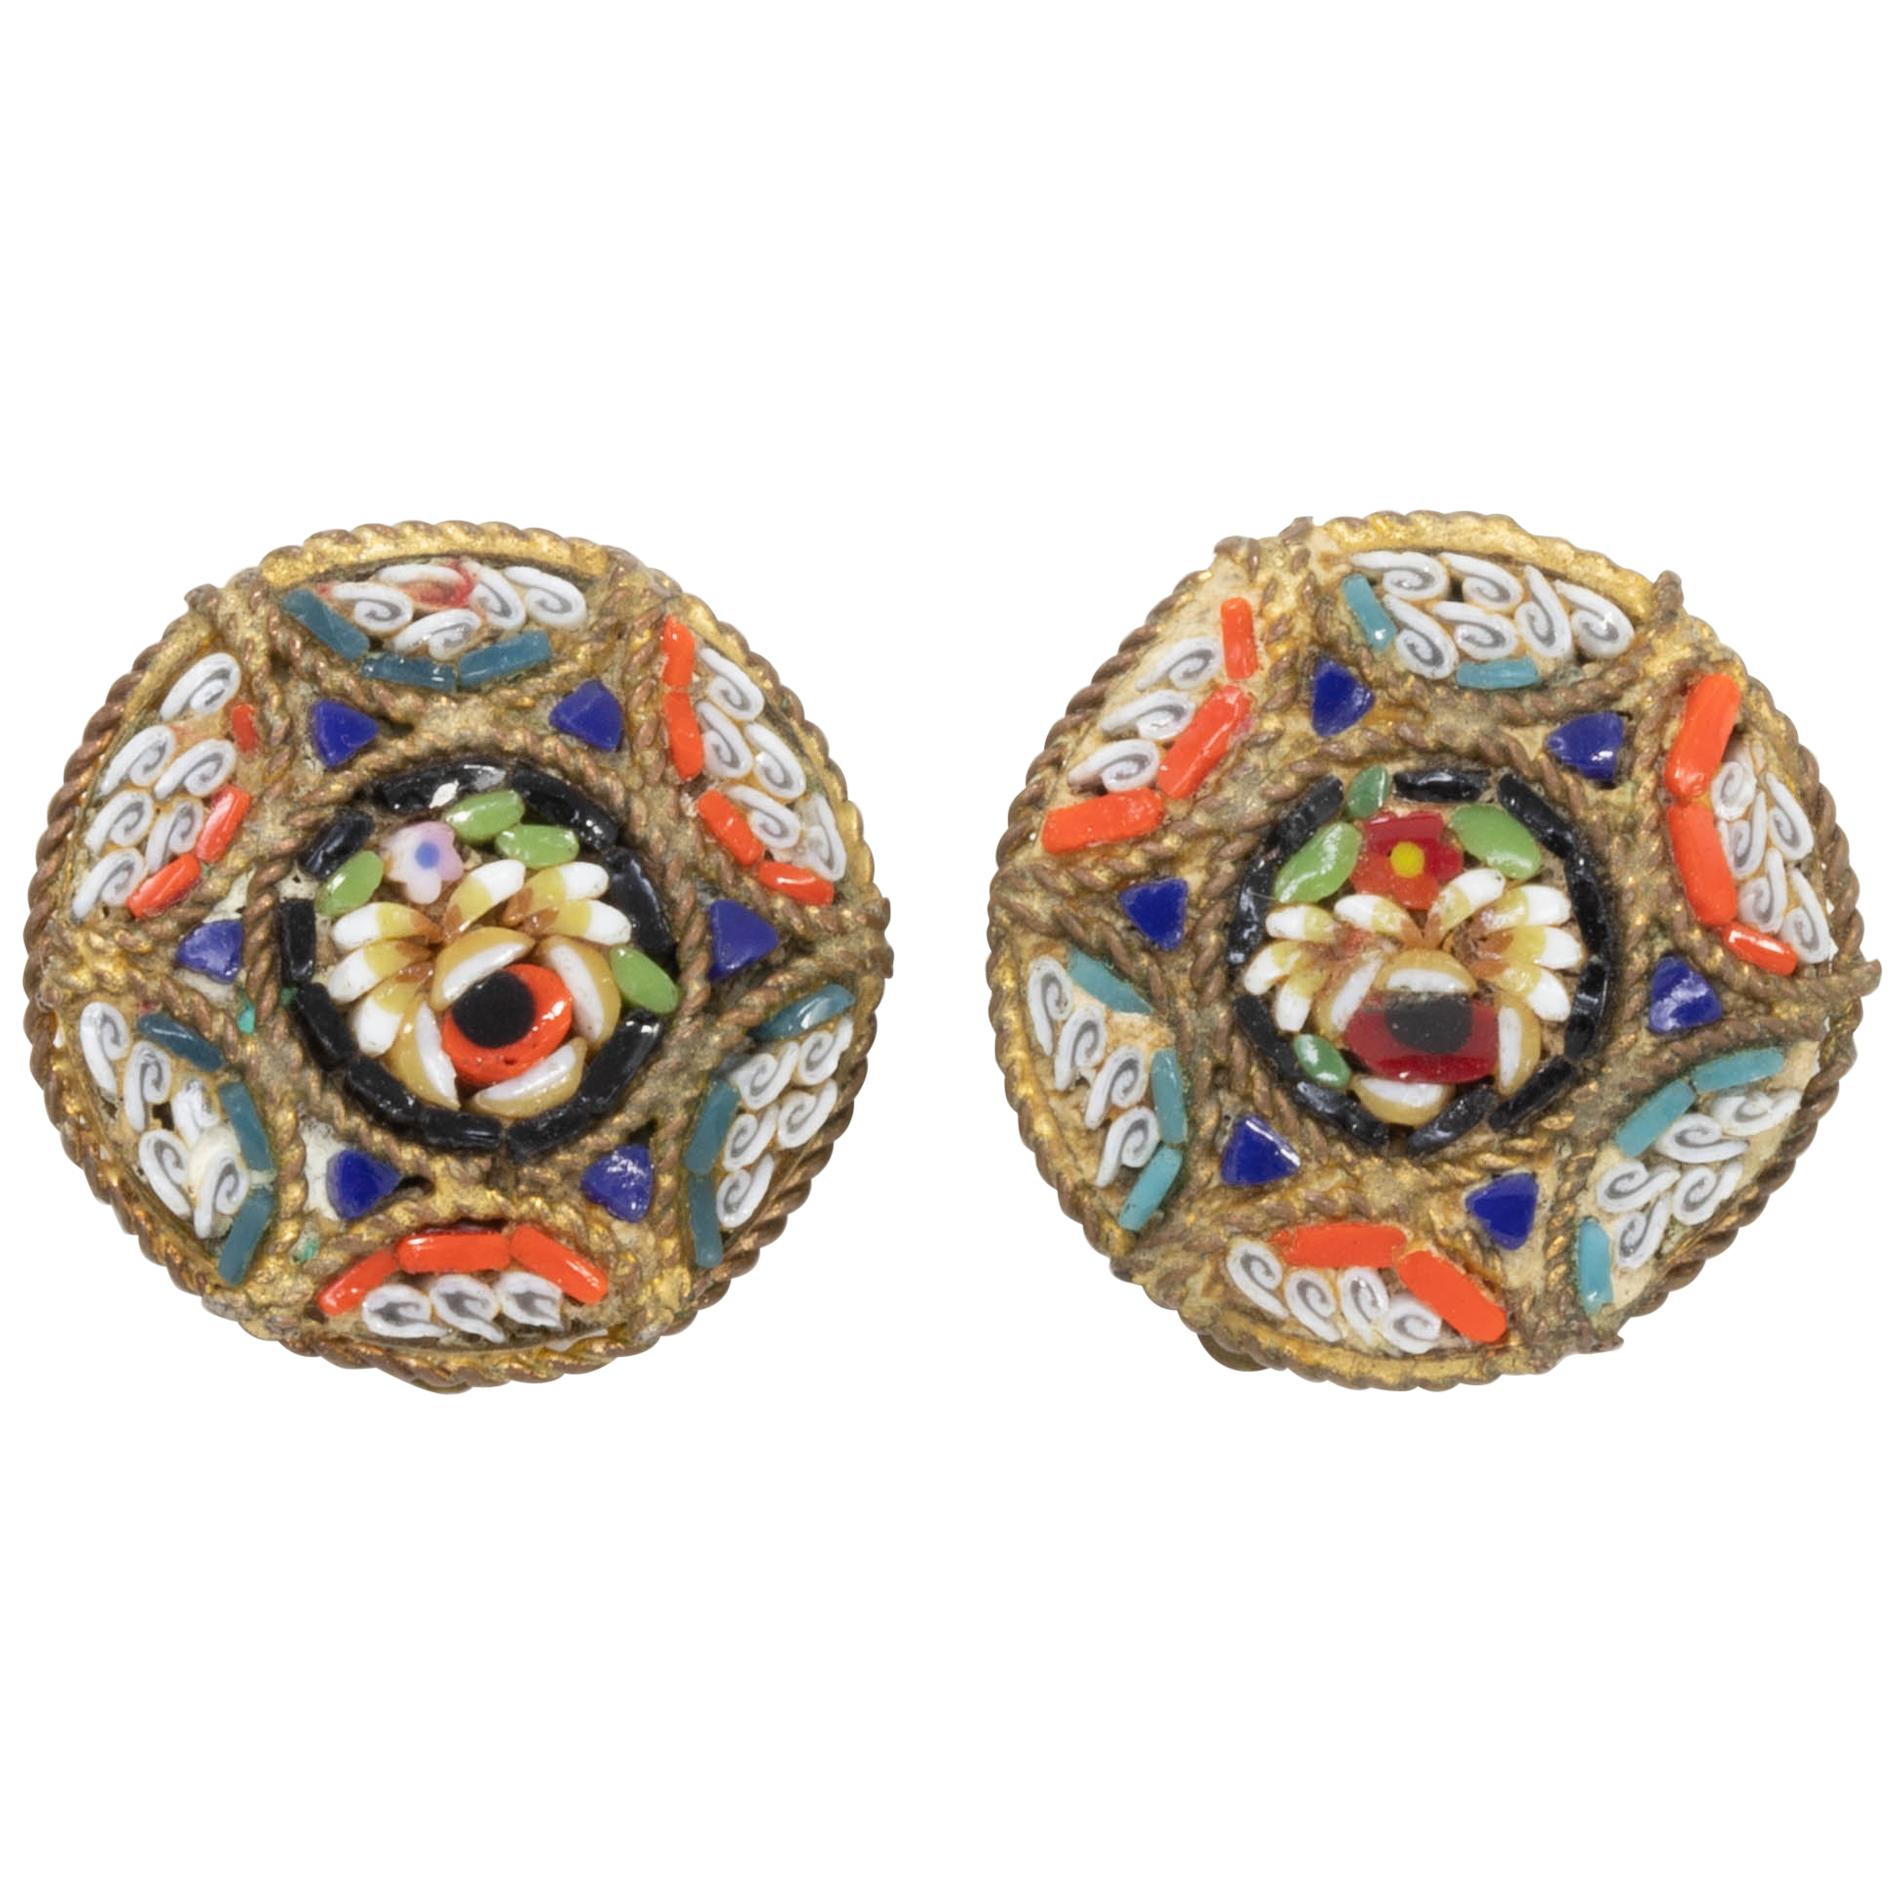 Italian Cloisonne Mosaic Clip On Button Earrings in Brass Tone, Early Mid 1900s For Sale